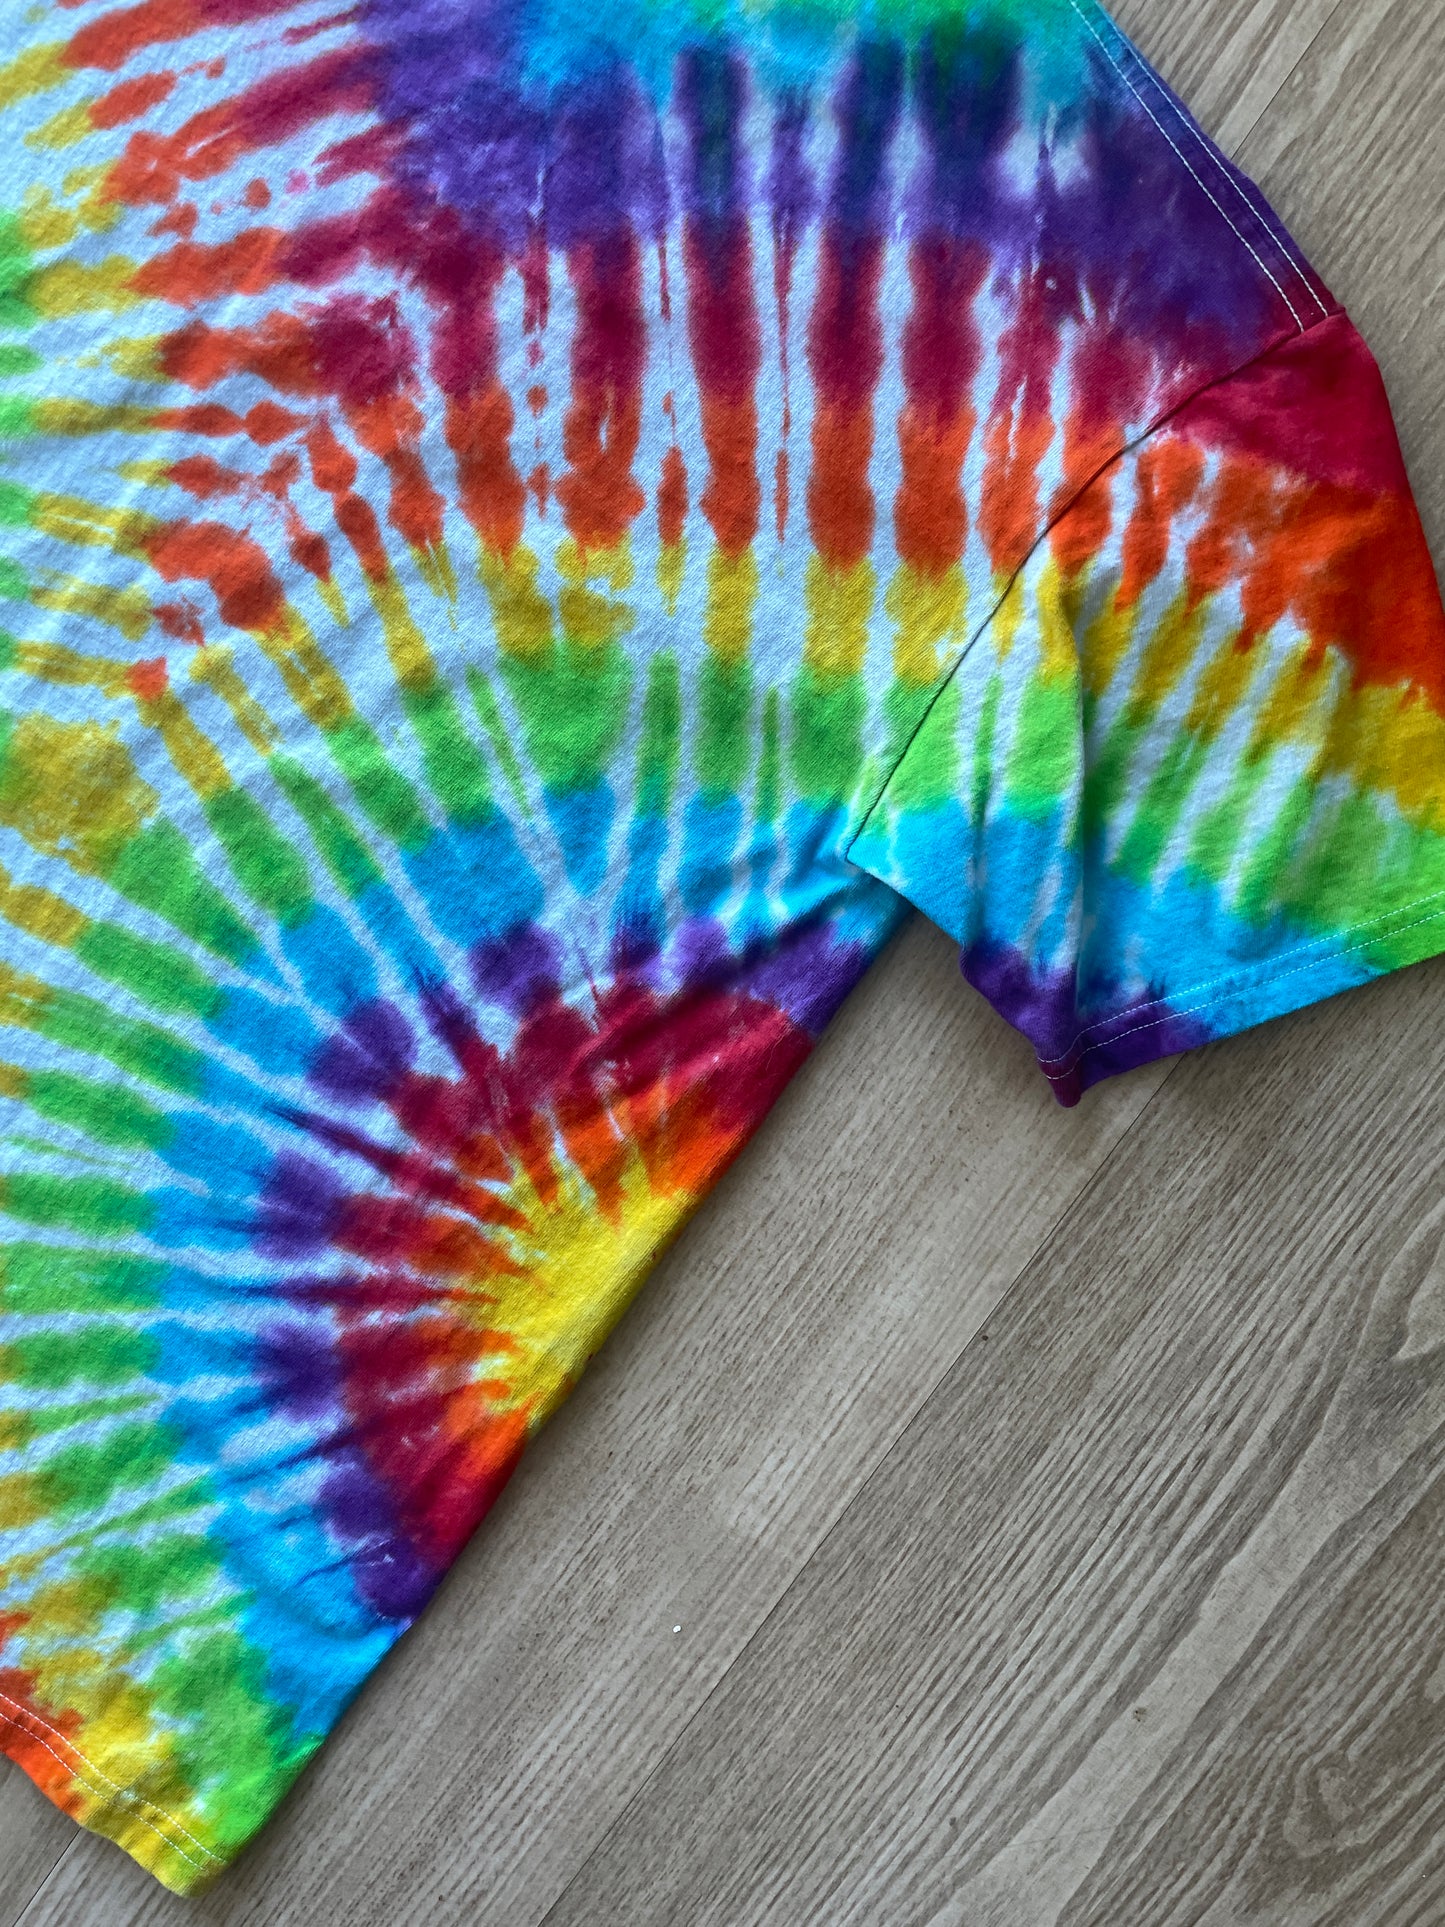 MEDIUM Men’s Vans Pride Authentic Together as Ourselves Handmade Tie Dye Short Sleeve T-Shirt | One-Of-a-Kind Upcycled Rainbow Pleated Top